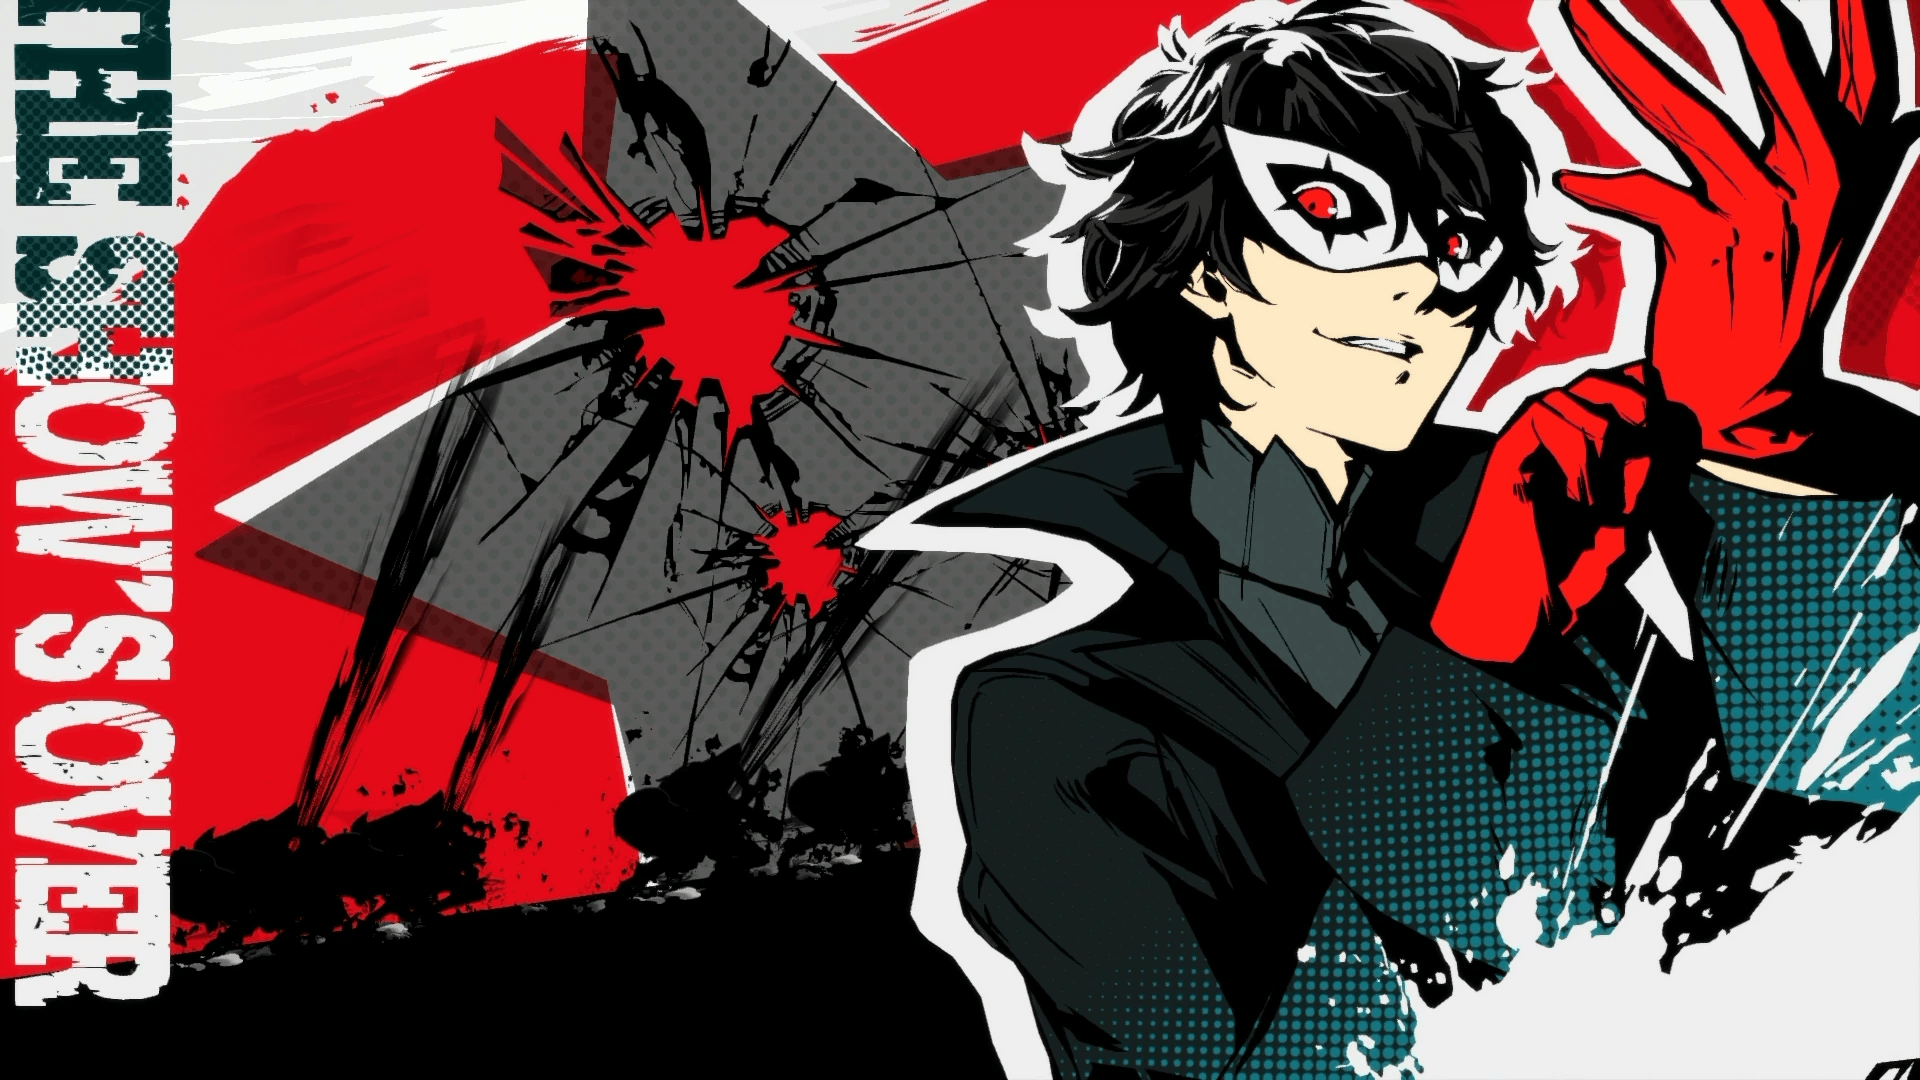 47 Persona 5 HD Wallpapers